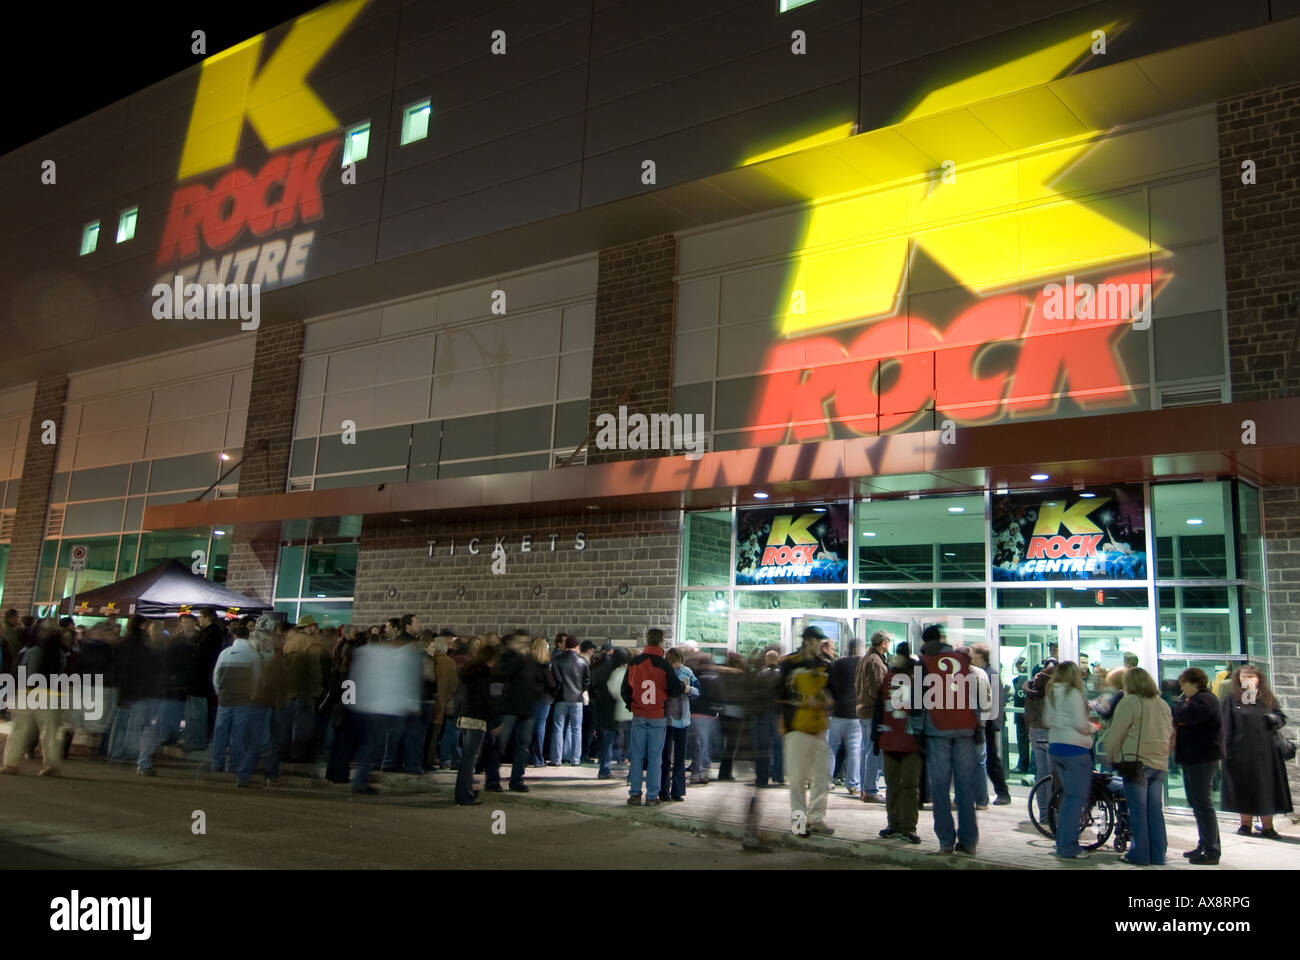 A crowd gathers outside the new K Rock Centre for the Tragically Hip concert in Kingston Ontario on Feb 23rd 2008 Stock Photo